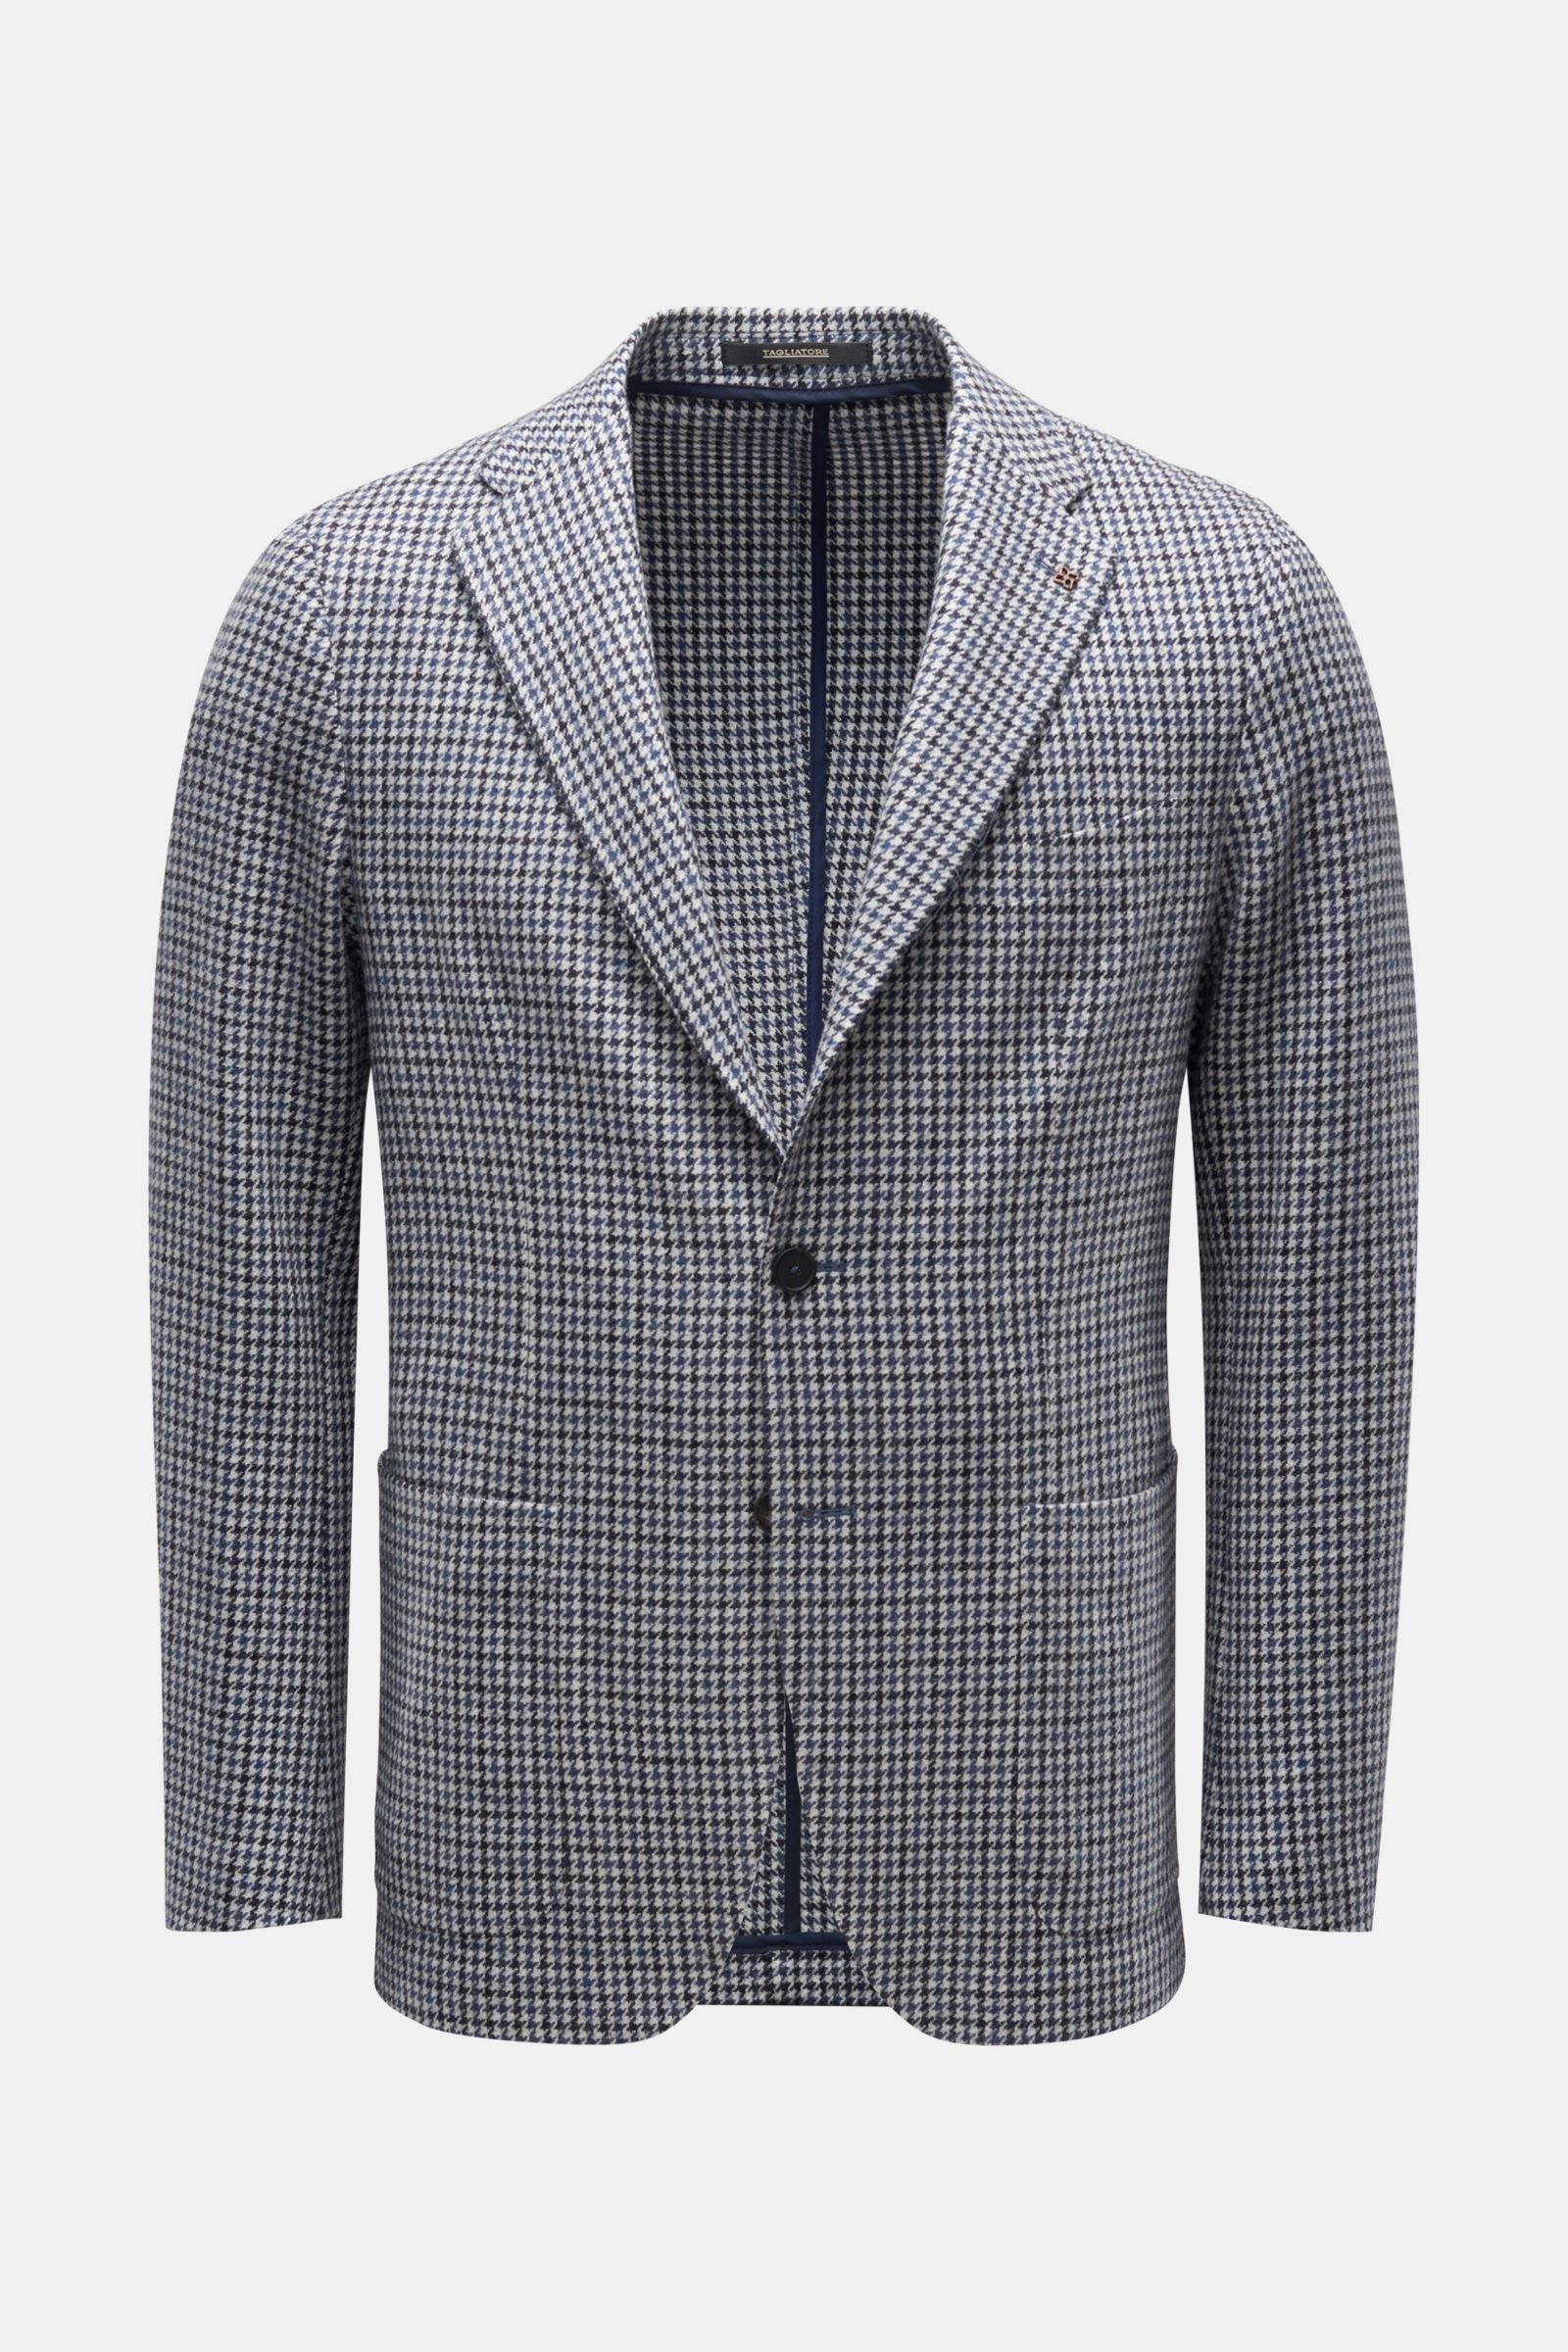 Smart-casual jacket grey-blue/black/white checked